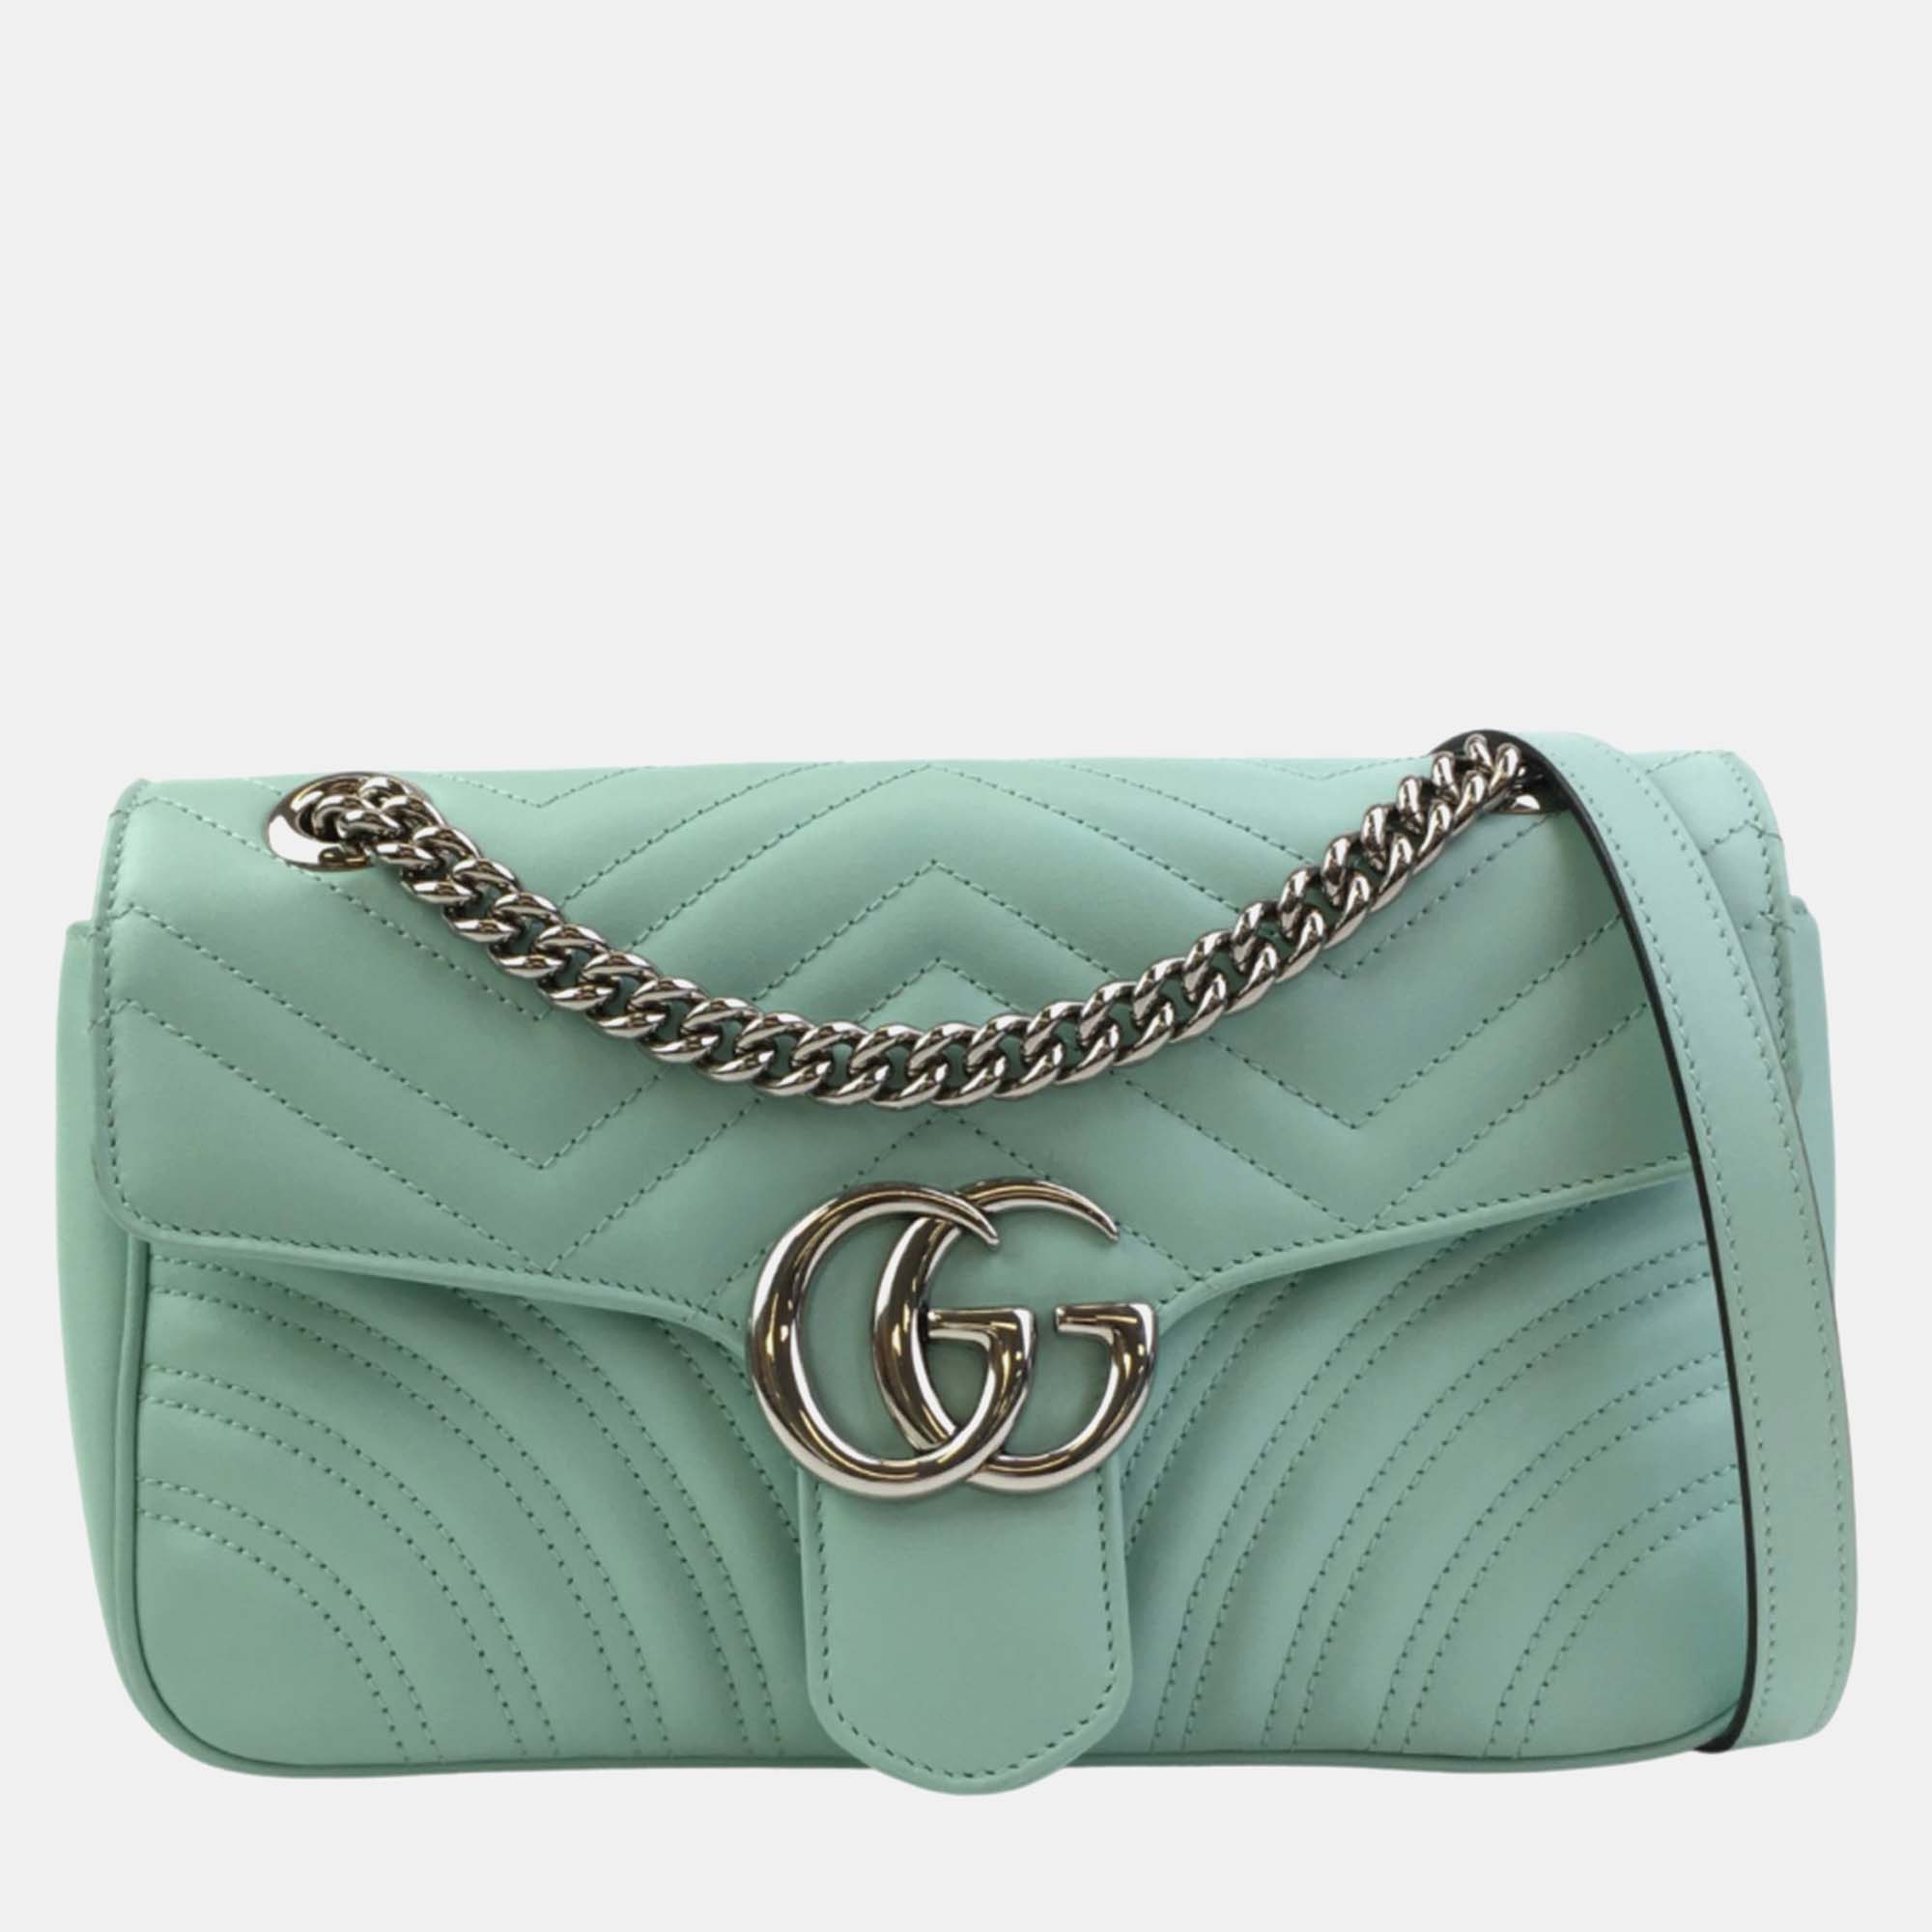 Gucci blue leather small gg marmont shoulder bag